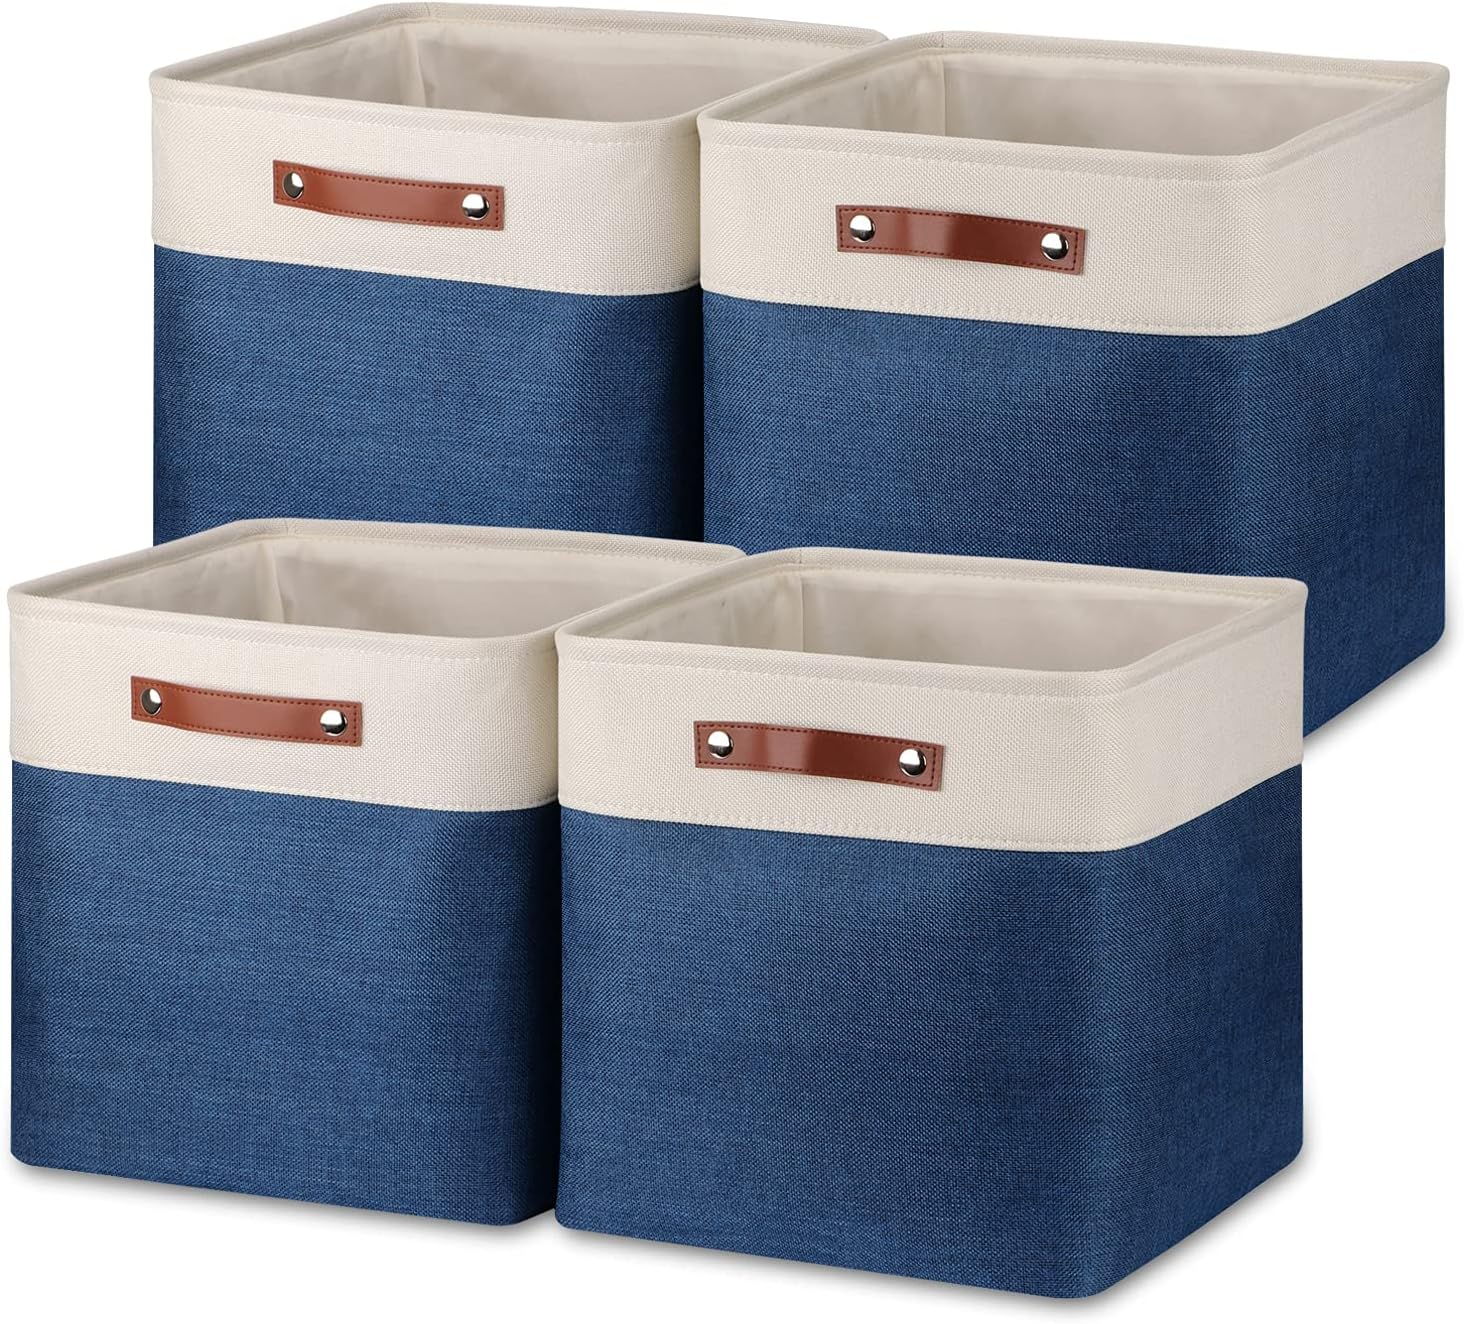 Temary Blue Storage Baskets for Shelves 13 Inch Cube Storage Bins 4Pack Fabric Cubes Basket with Handles for Organizing Shelf Baskets for Home Office Closet (White&Blue)